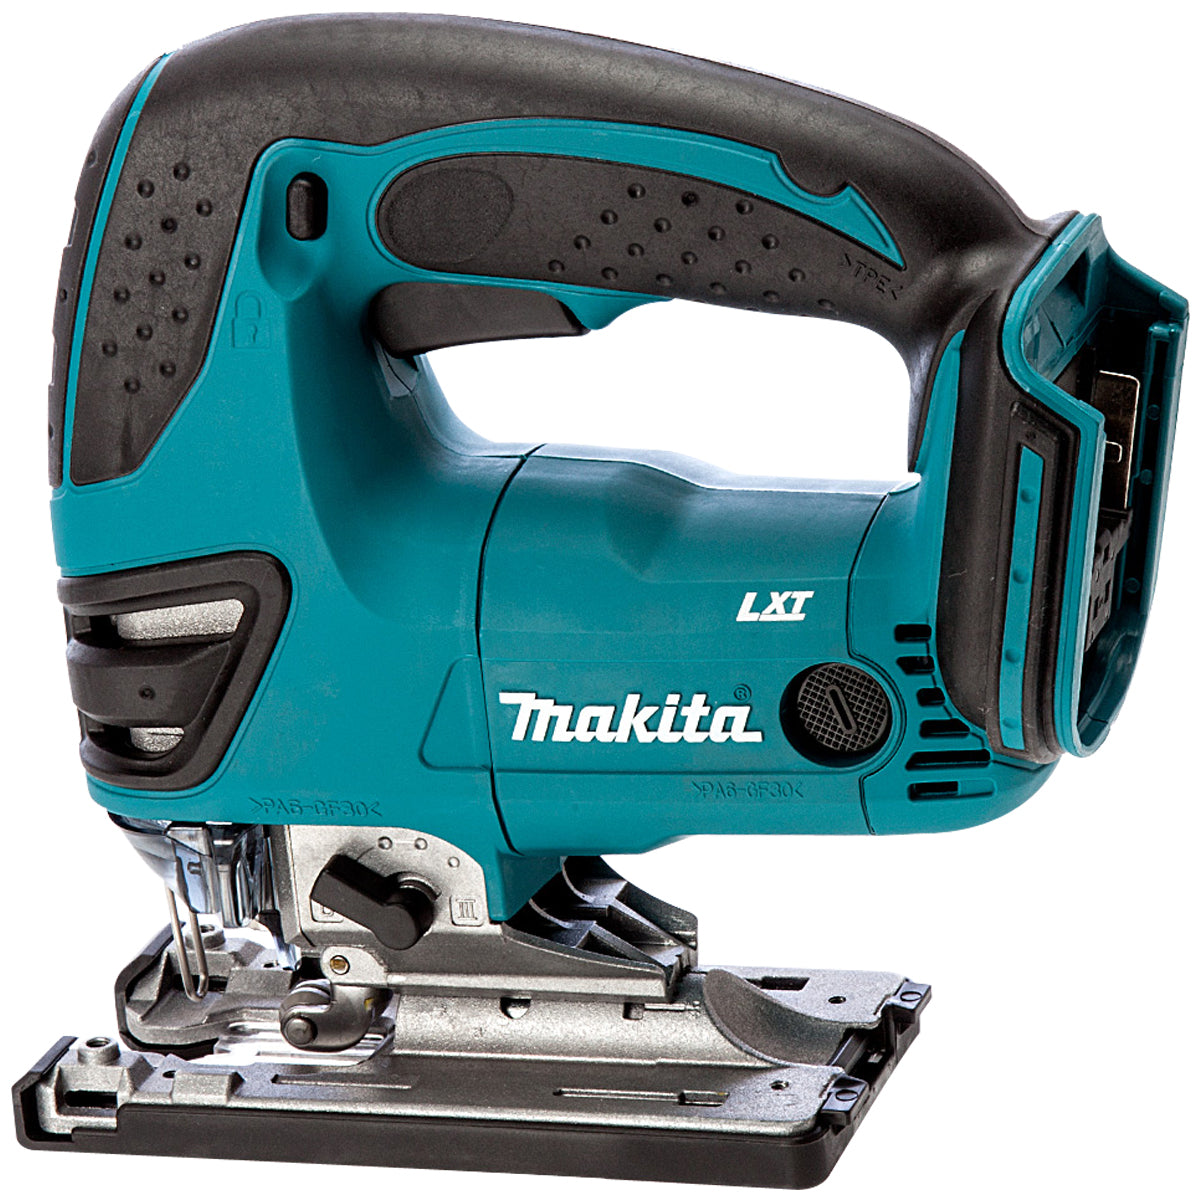 Makita 18V 9 Piece Power Tool Kit with 3 x 5.0Ah Batteries & Charger T4TKIT-318